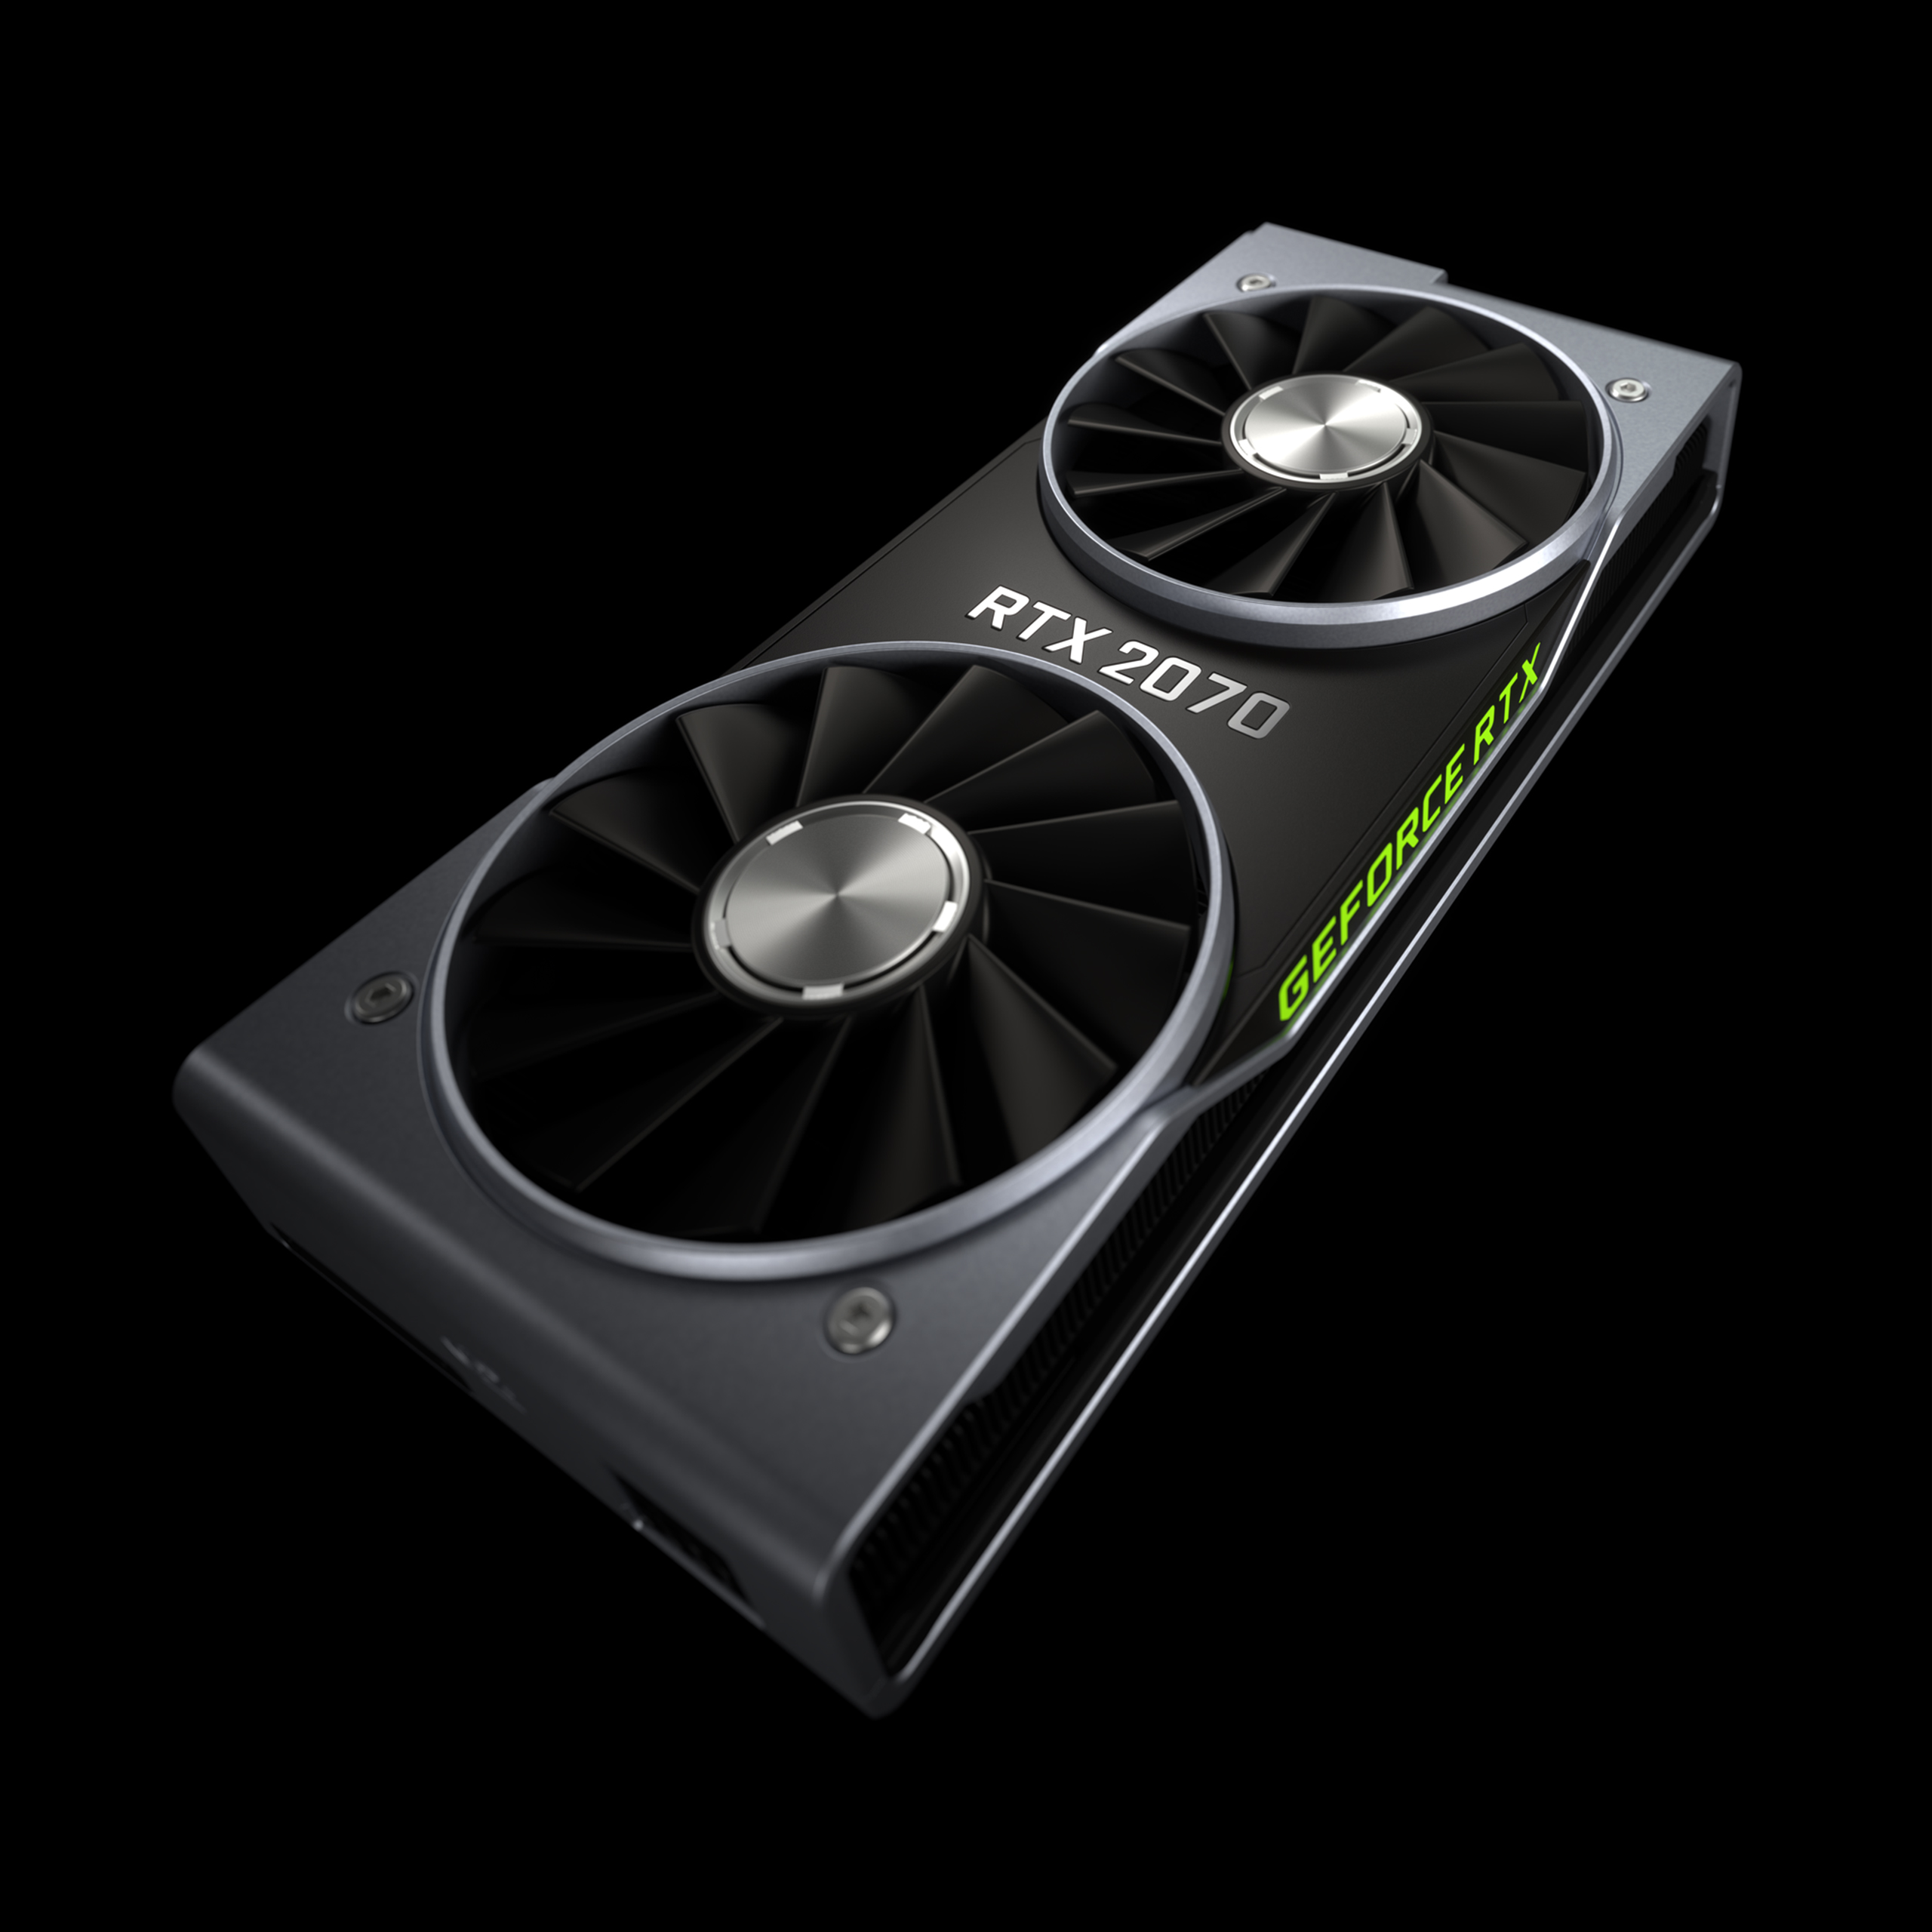 Nvidia confirms launch of GeForce 2070 October 17 $499 - News